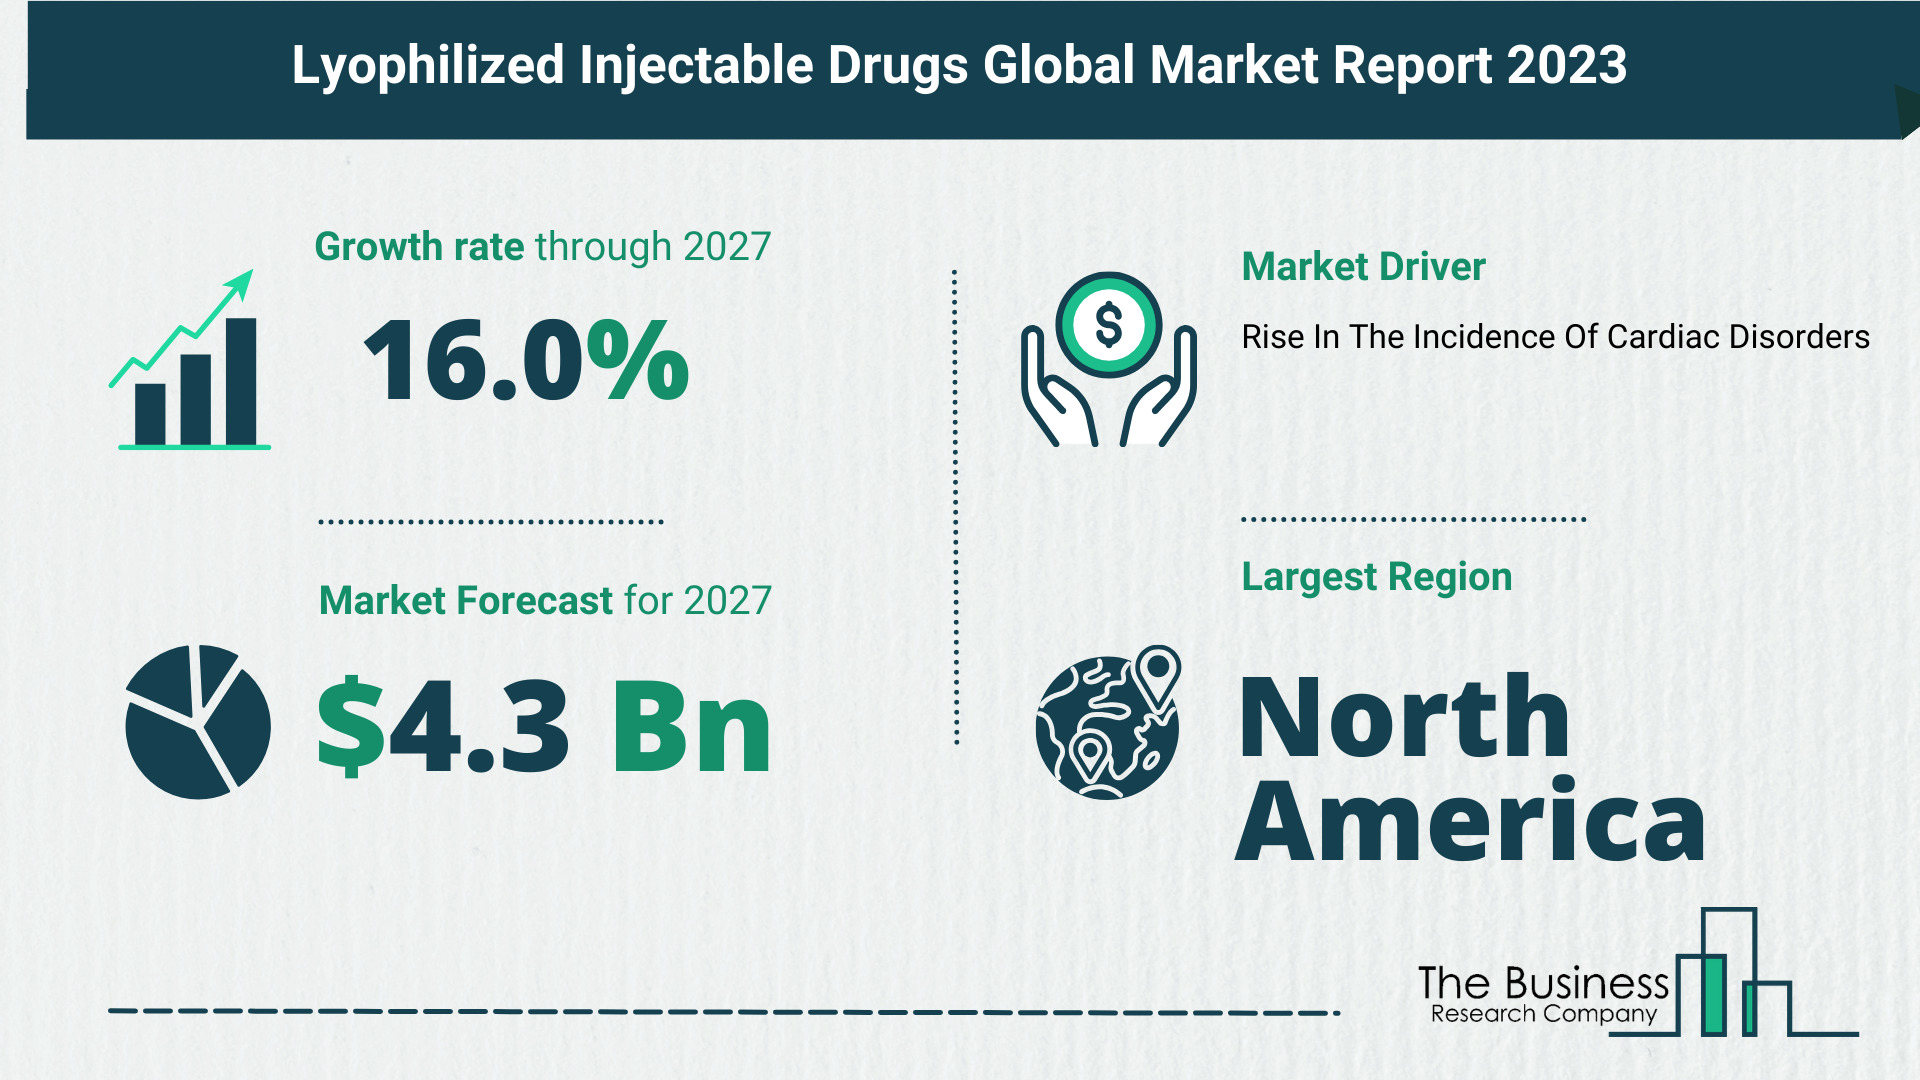 5 Key Insights On The Lyophilized Injectable Drugs Market 2023